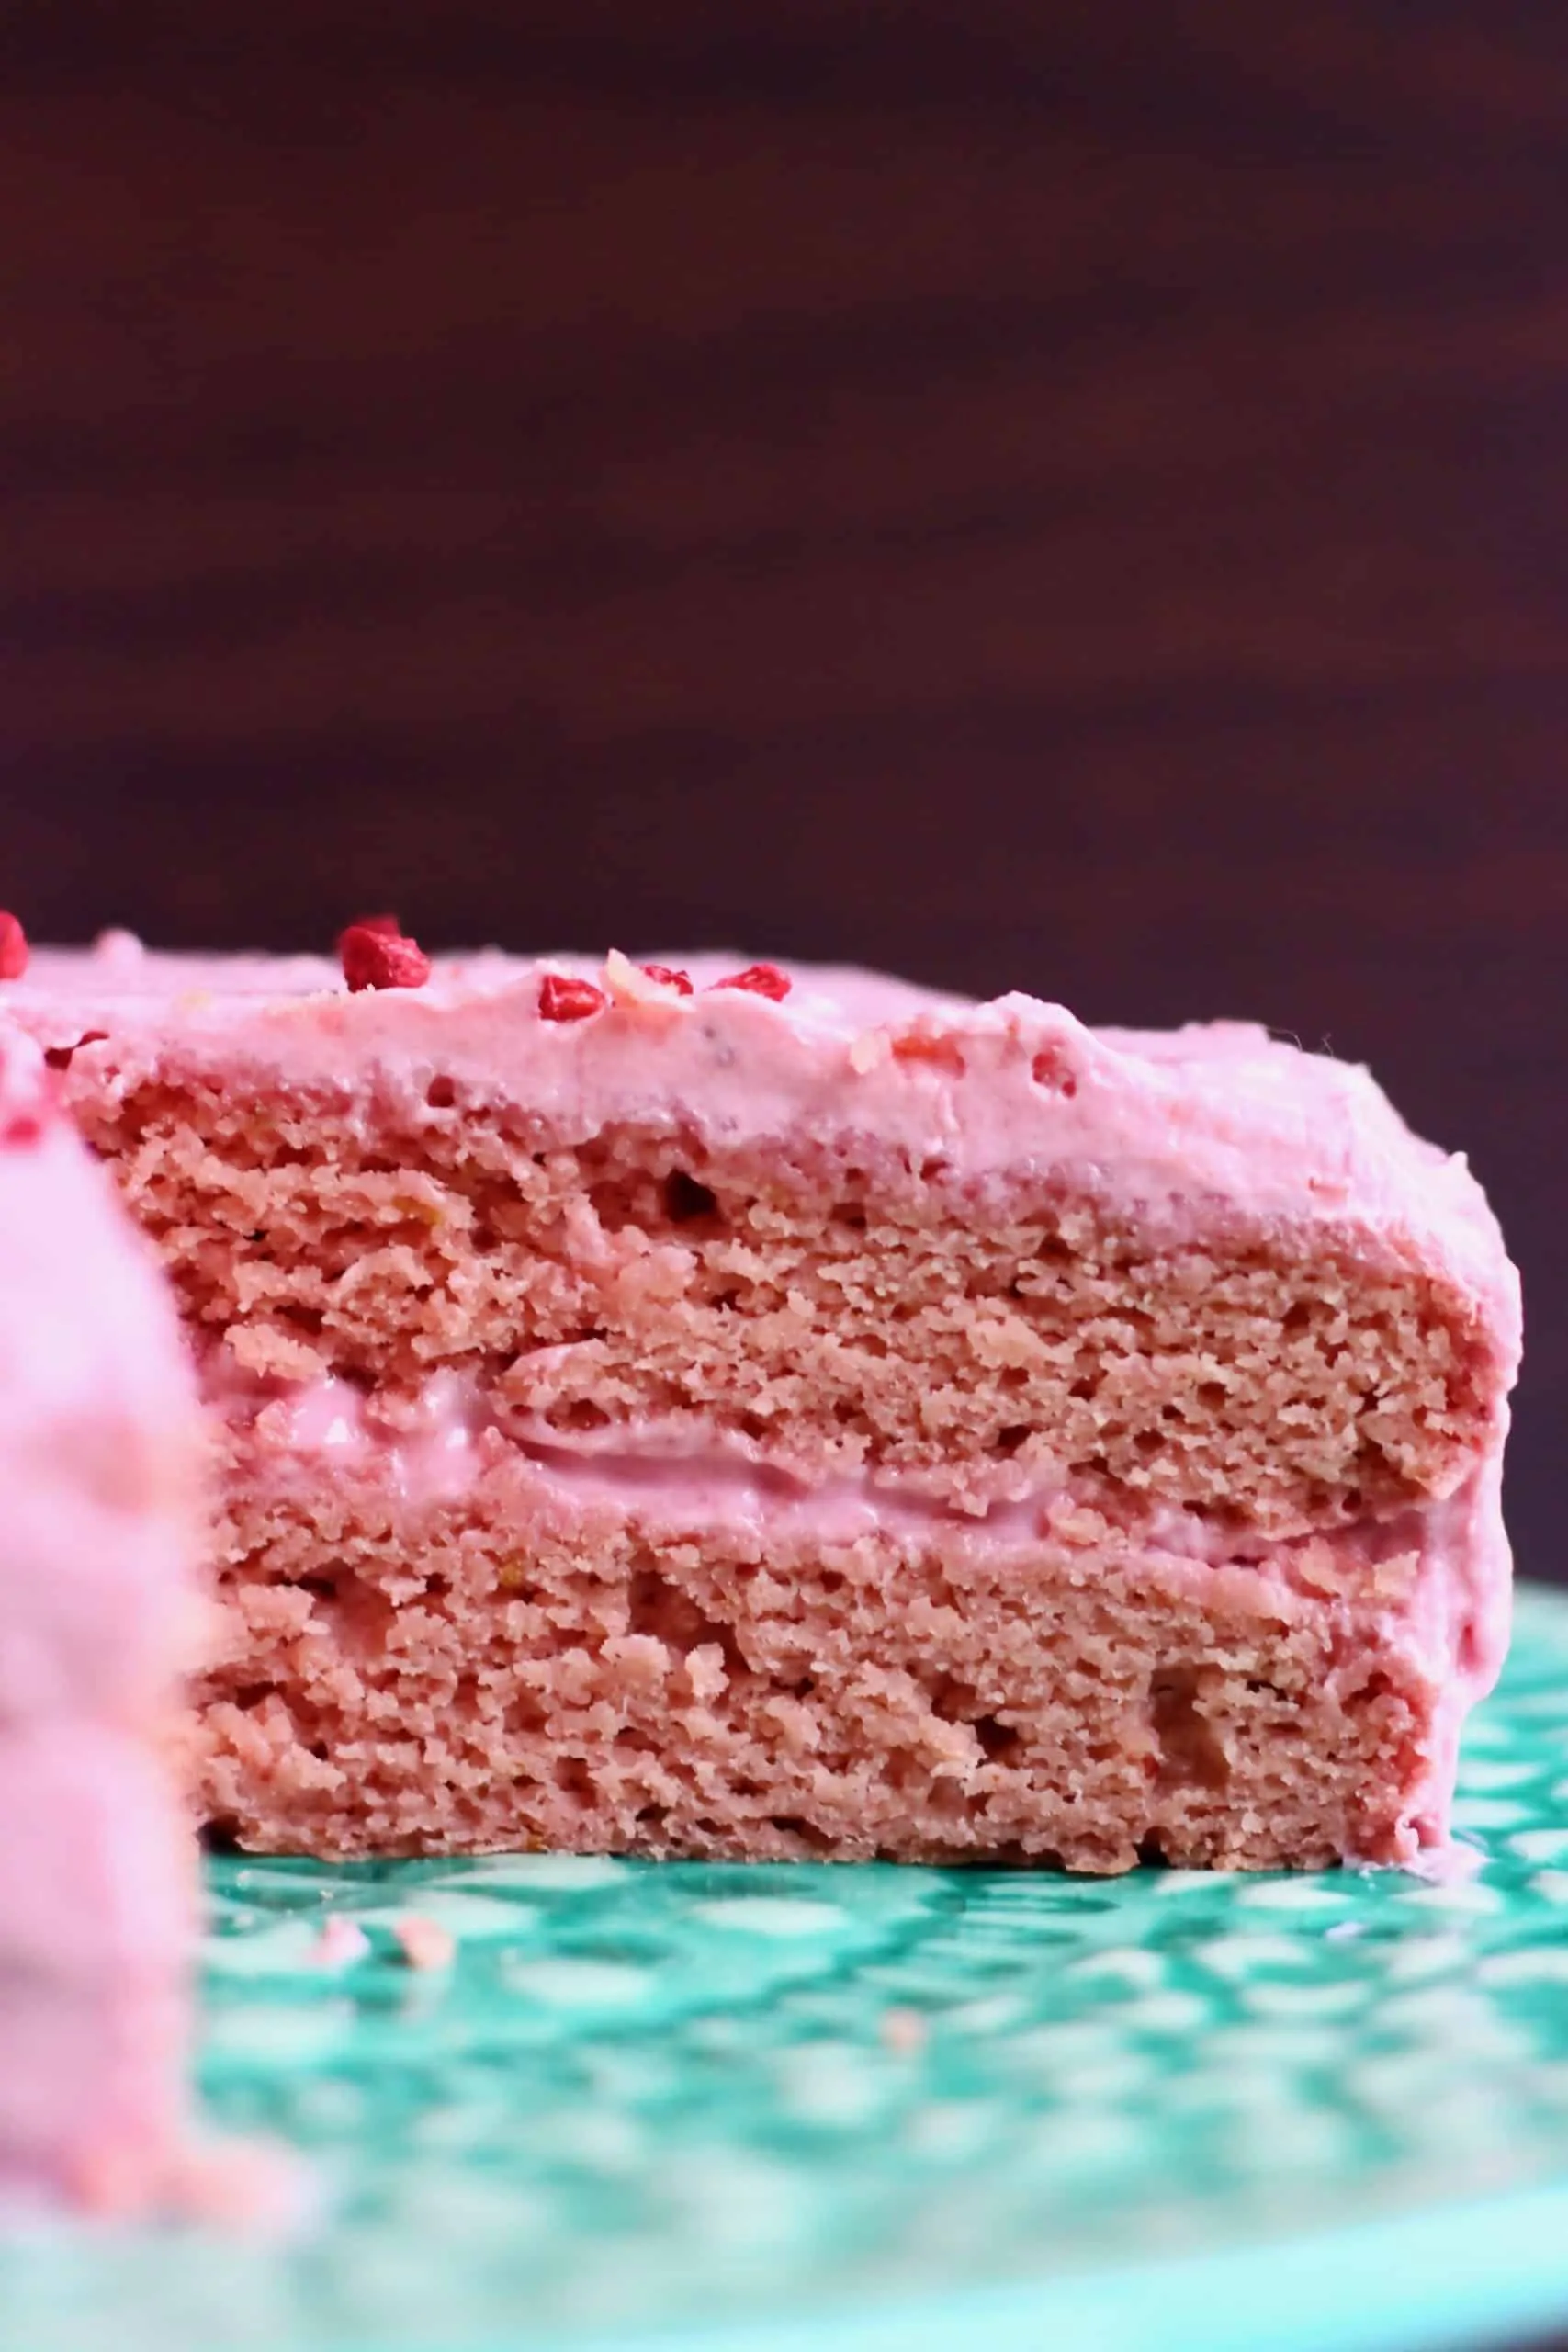 A sliced strawberry cake with strawberry frosting